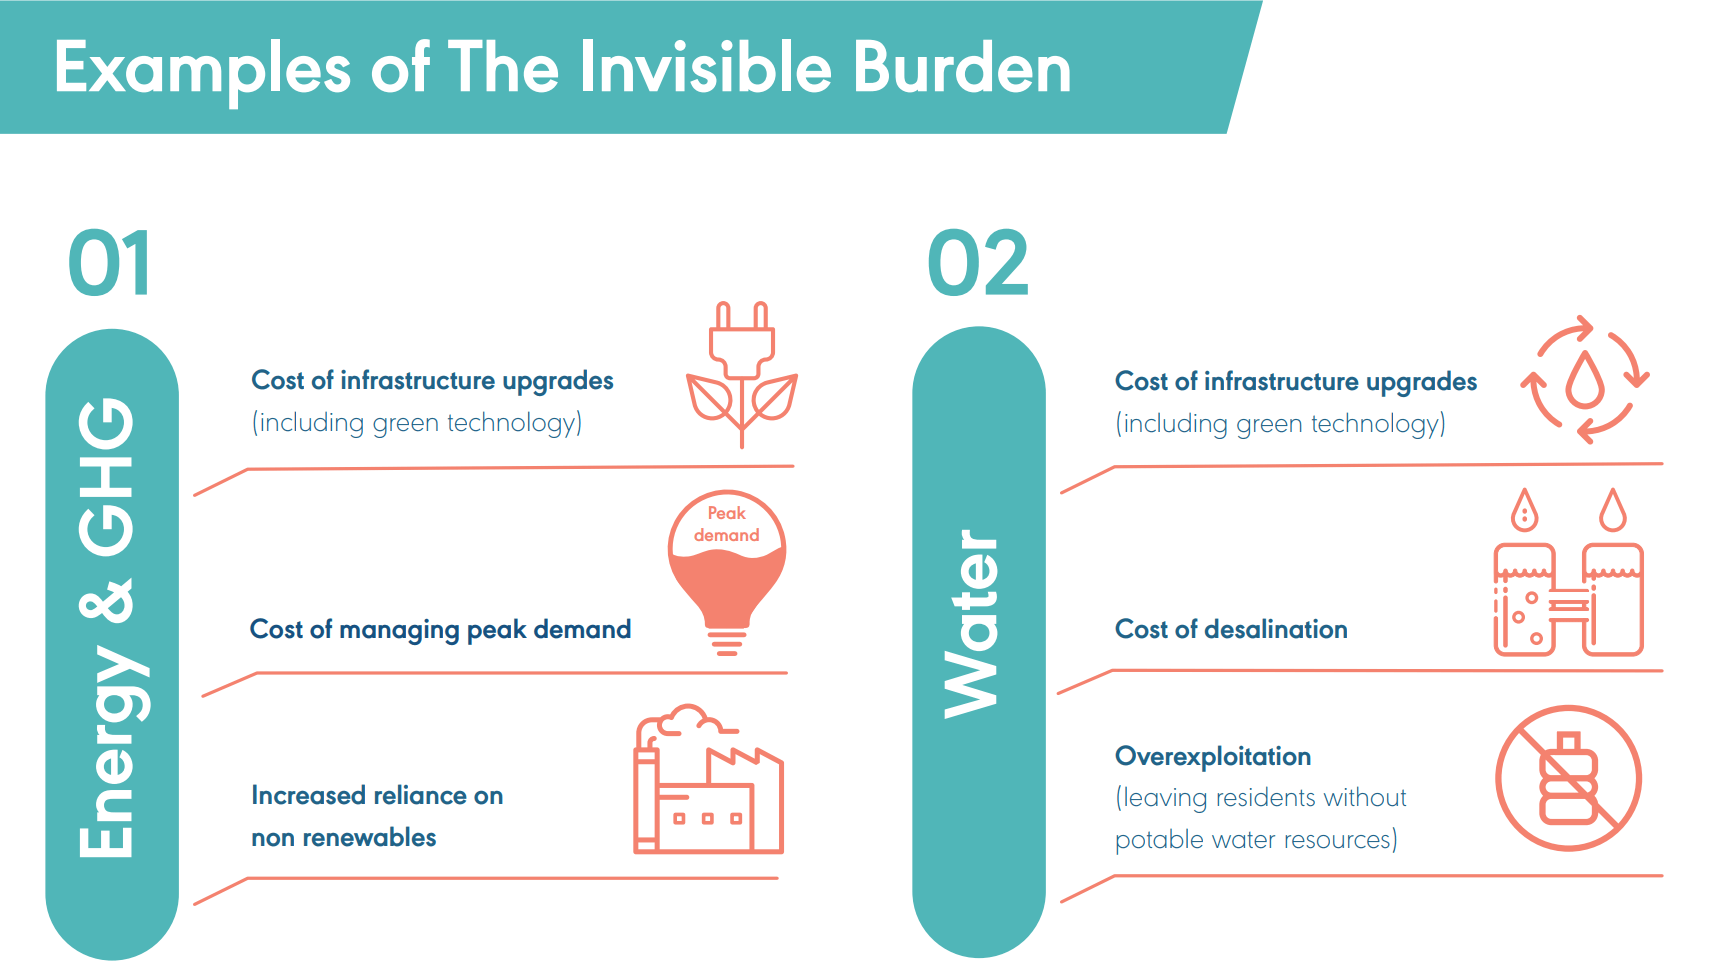 Examples of the invisible burdens caused by overtourism